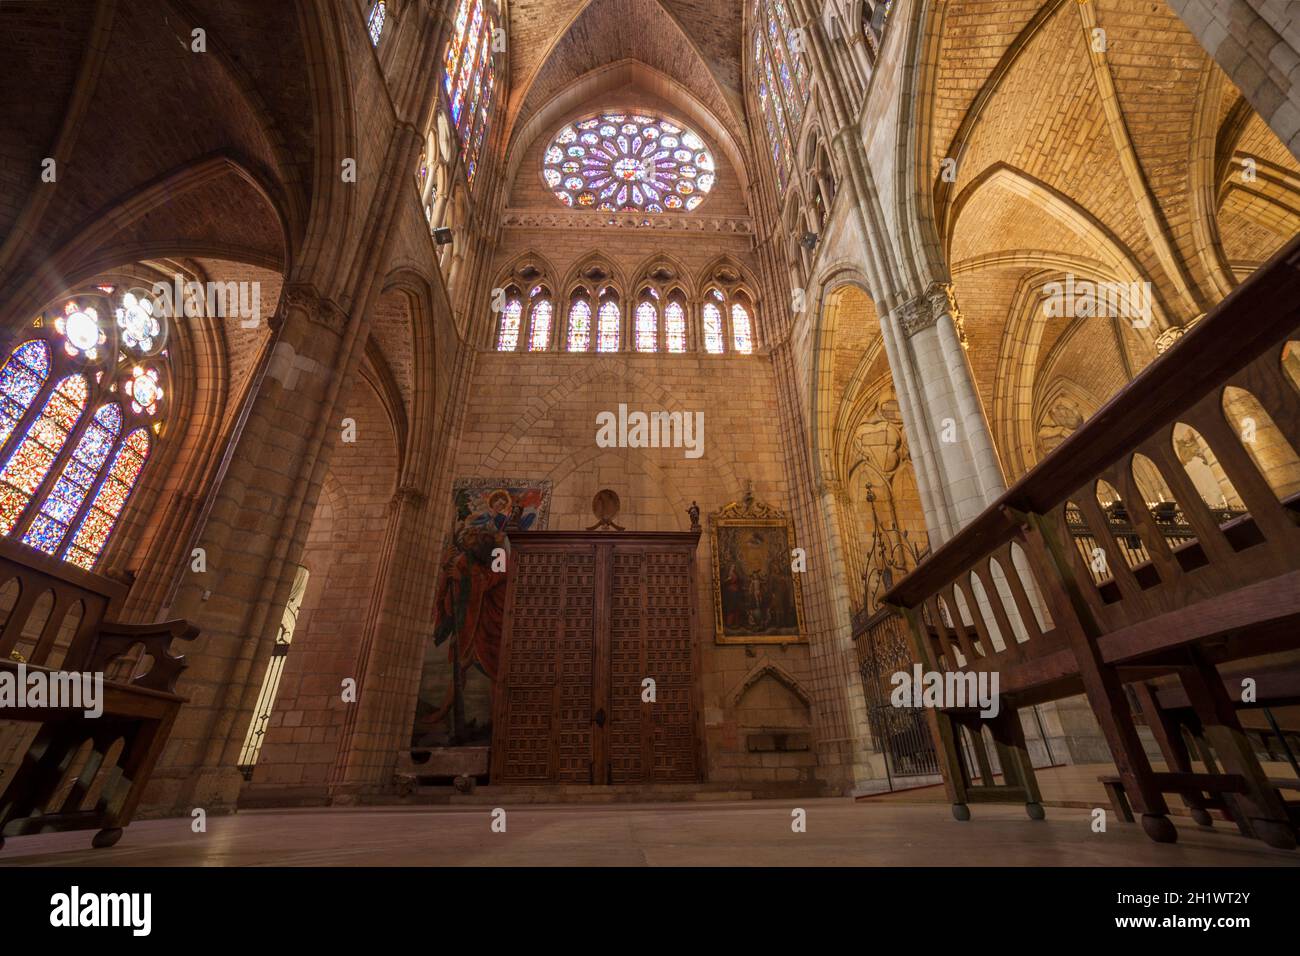 Leon, Spain - June 25th, 2019: Leon Cathedral side nave, also called The House of Light, Spain Stock Photo